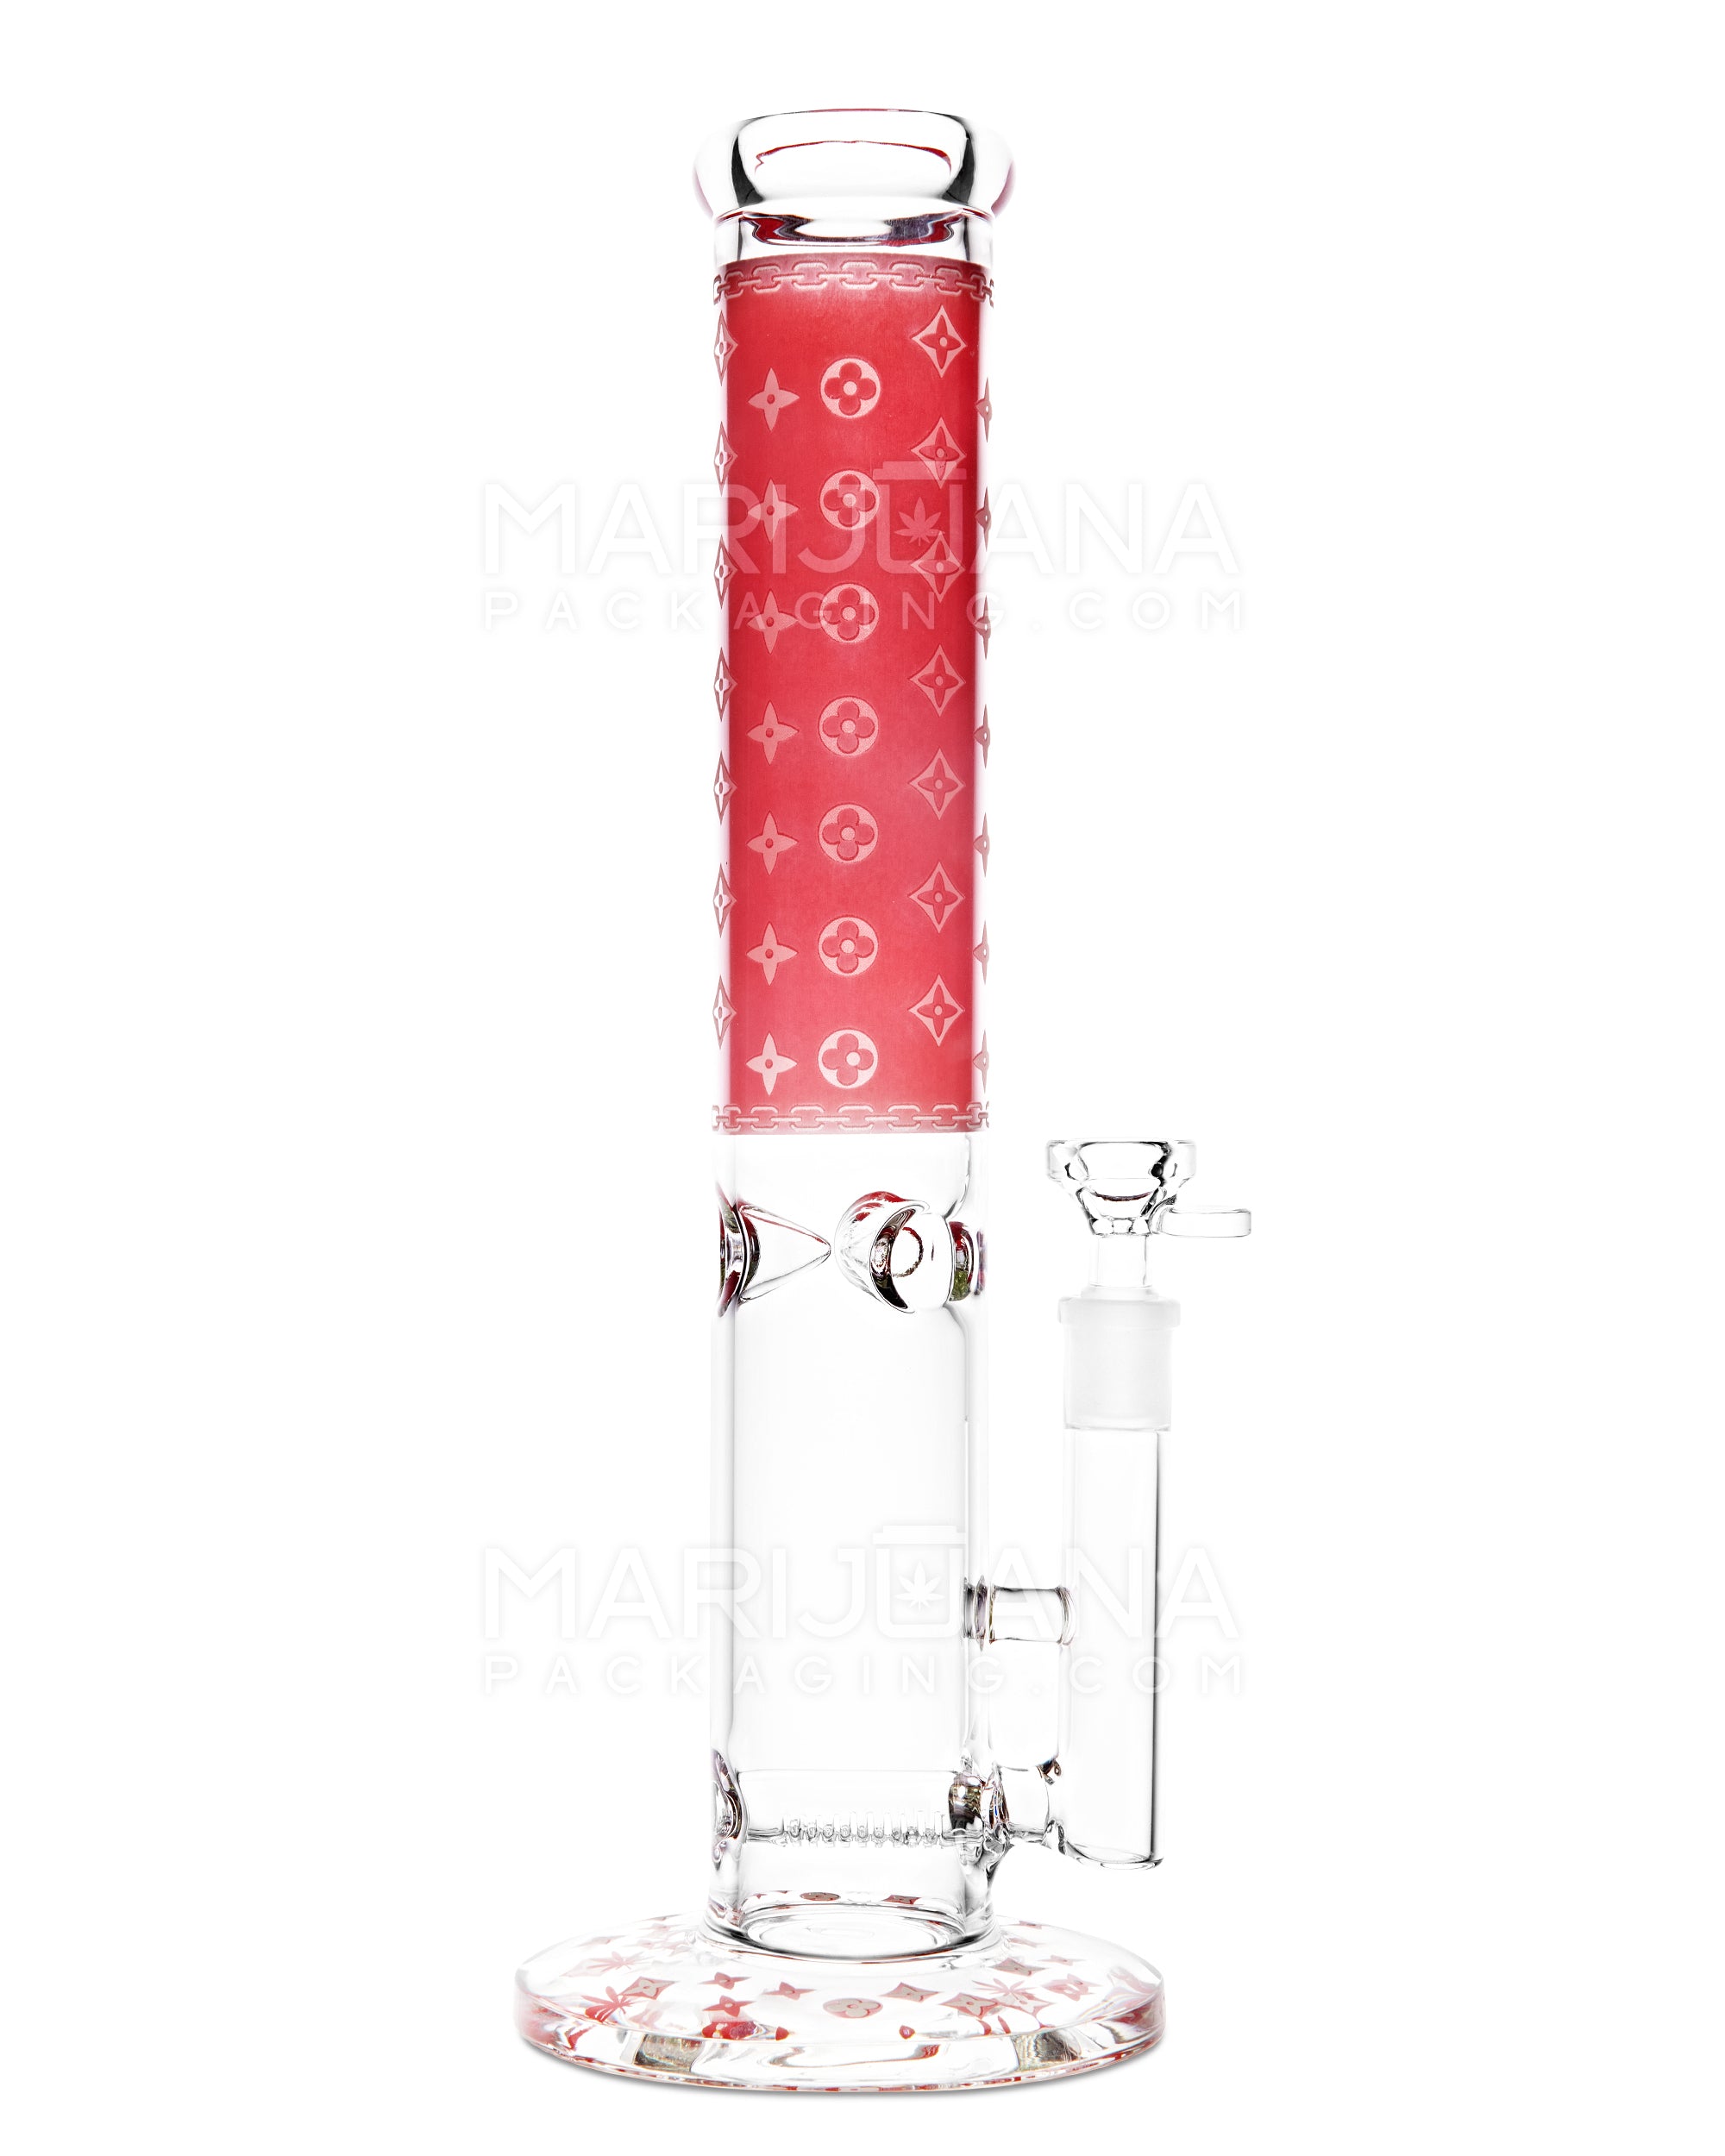 Straight Neck Luxury Design Inline Perc Glass Water Pipe w/ Ice Catcher | 14in Tall - 14mm Bowl - Red - 1